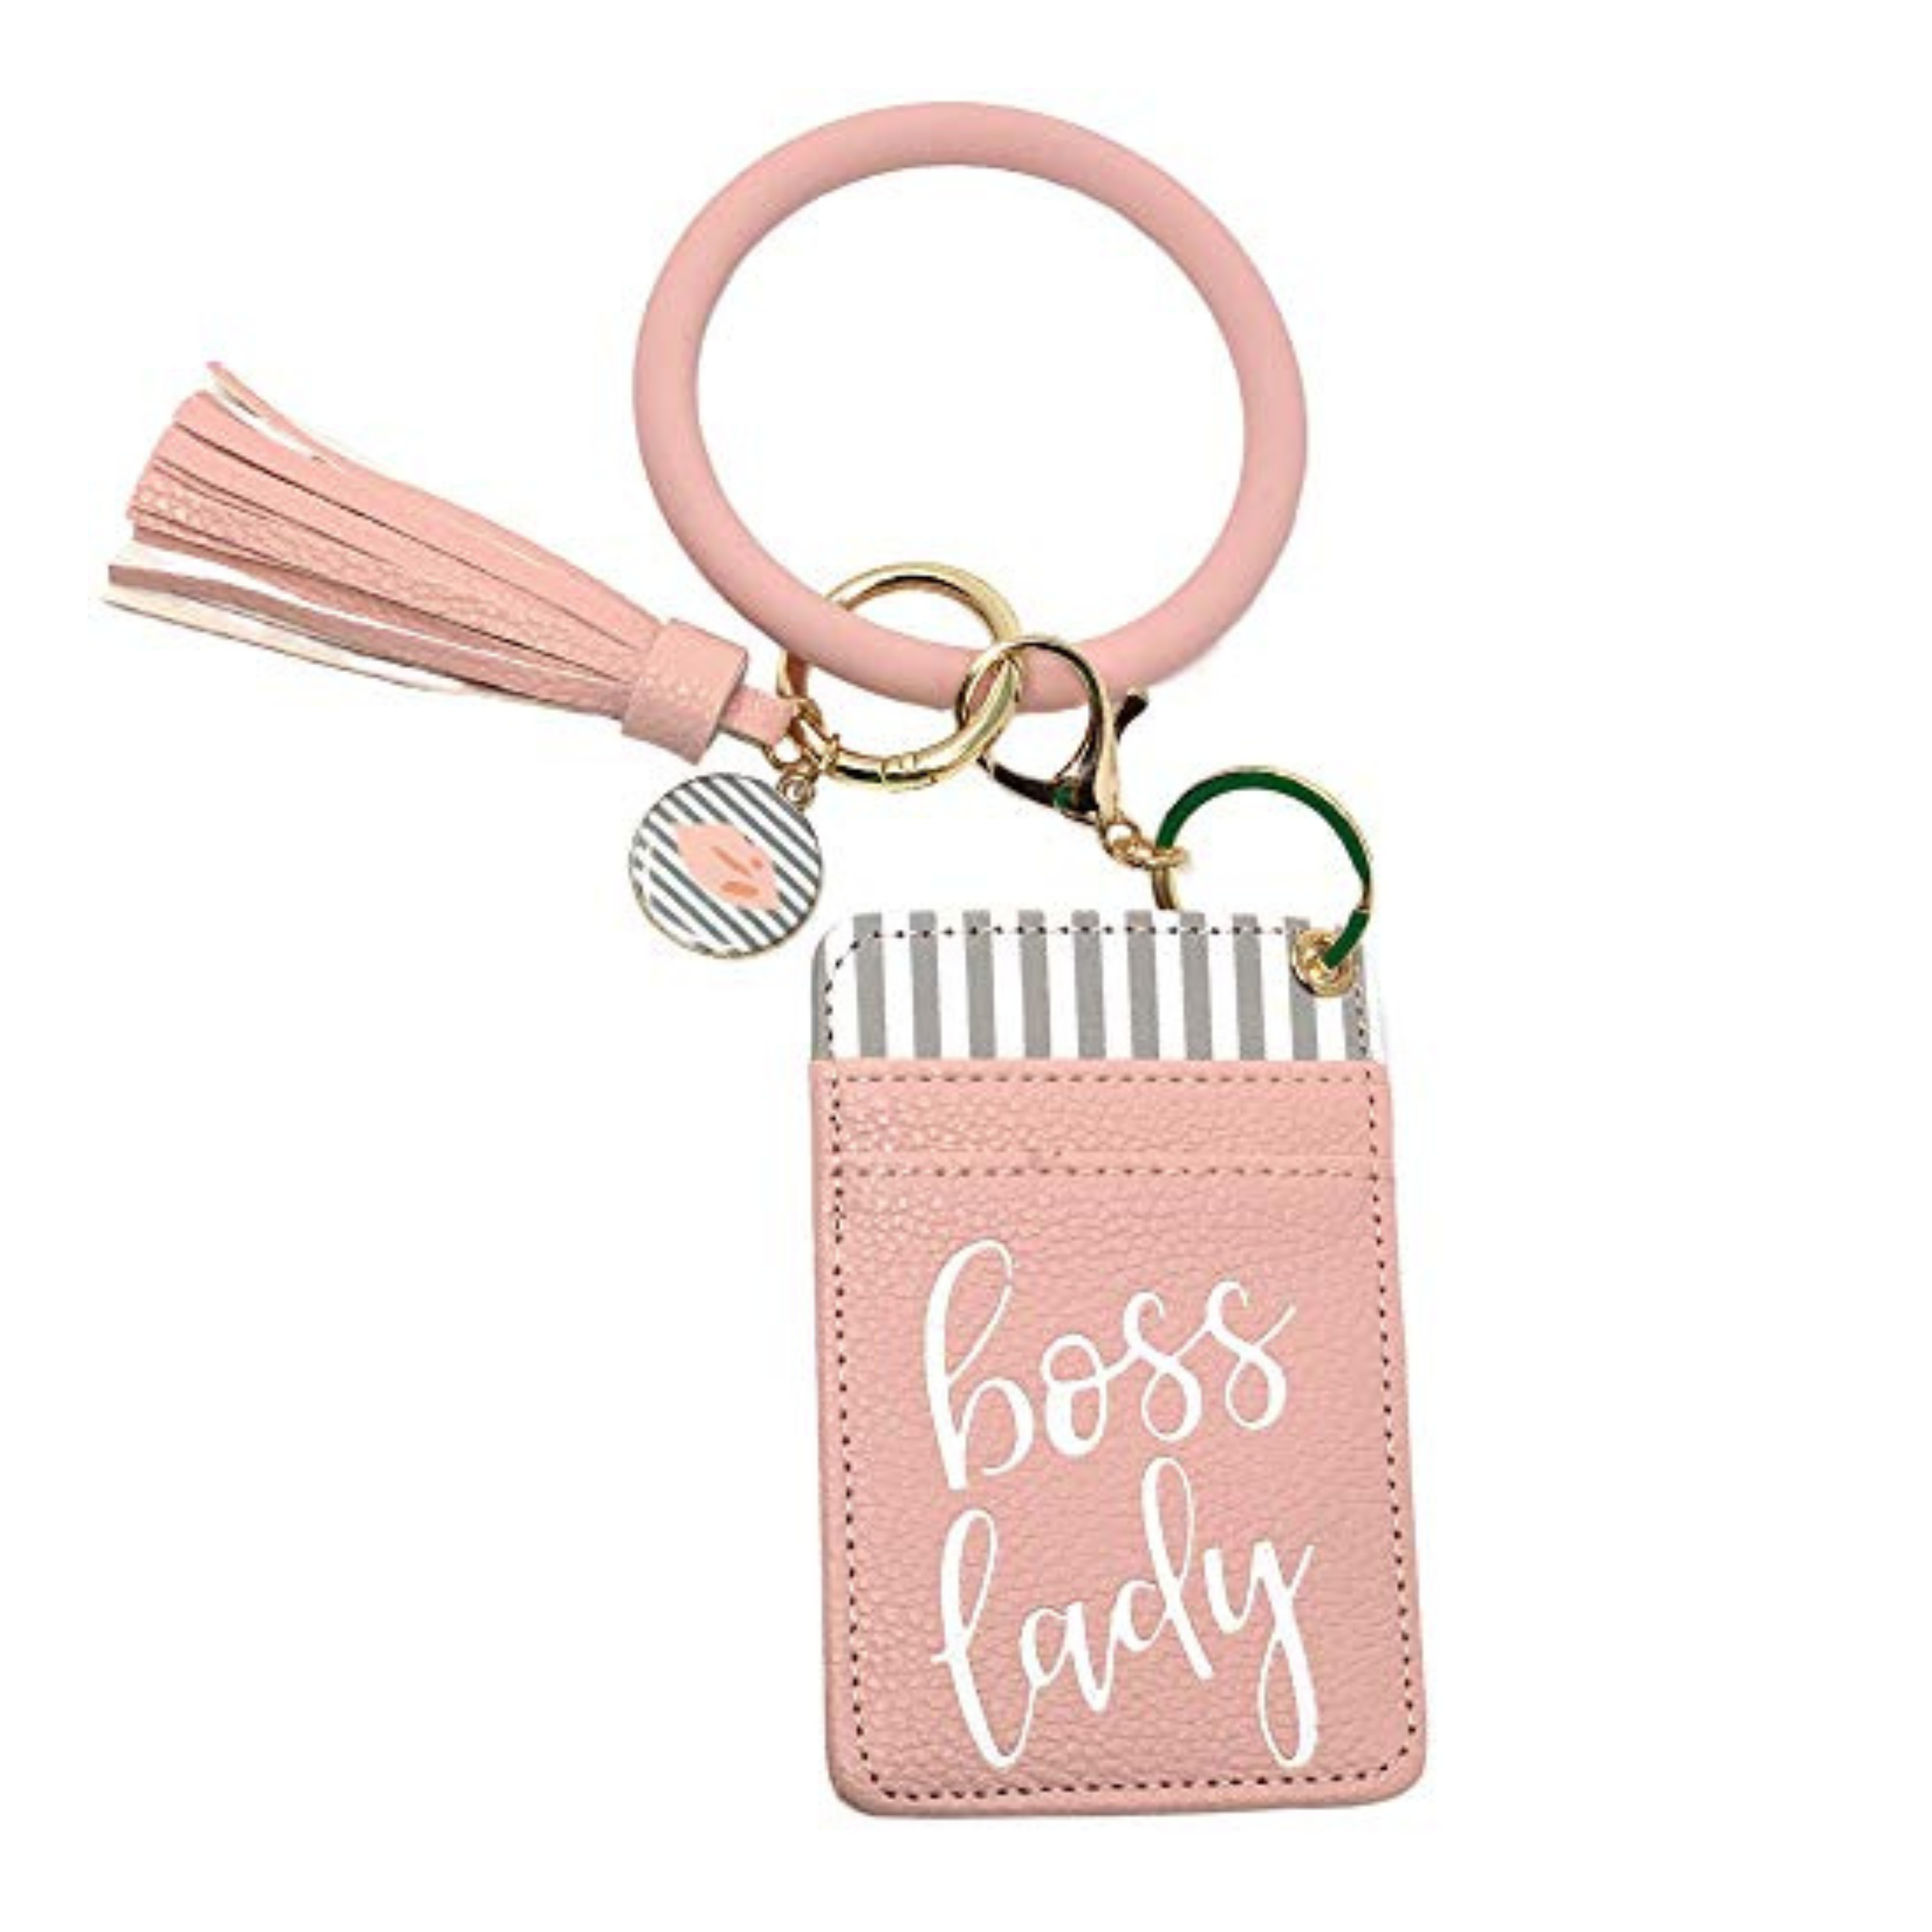 Keychain Bracelet Wristlet Key Chains Women 2 pcs Tassel Key Ring Bracelet  With Card Holder, White & White, 4*3.3 : Amazon.in: Bags, Wallets and  Luggage